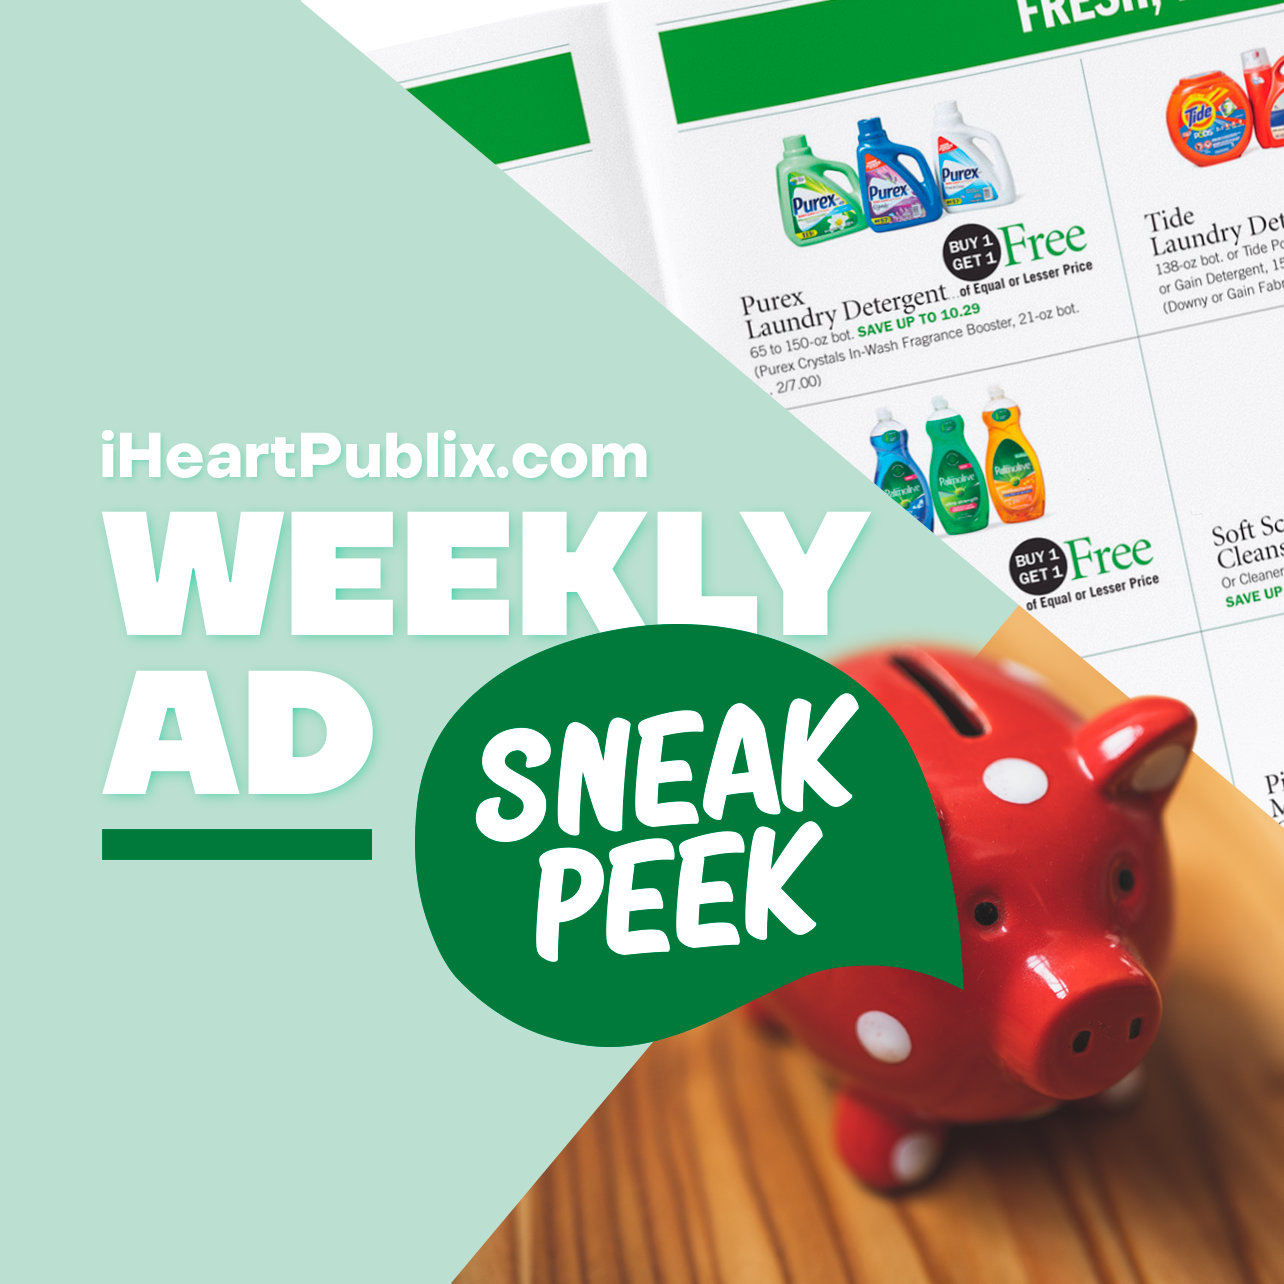 Publix Ad & Coupons Week Of 2/9 to 2/15 (2/8 to 2/14 For Some) -  iHeartPublix